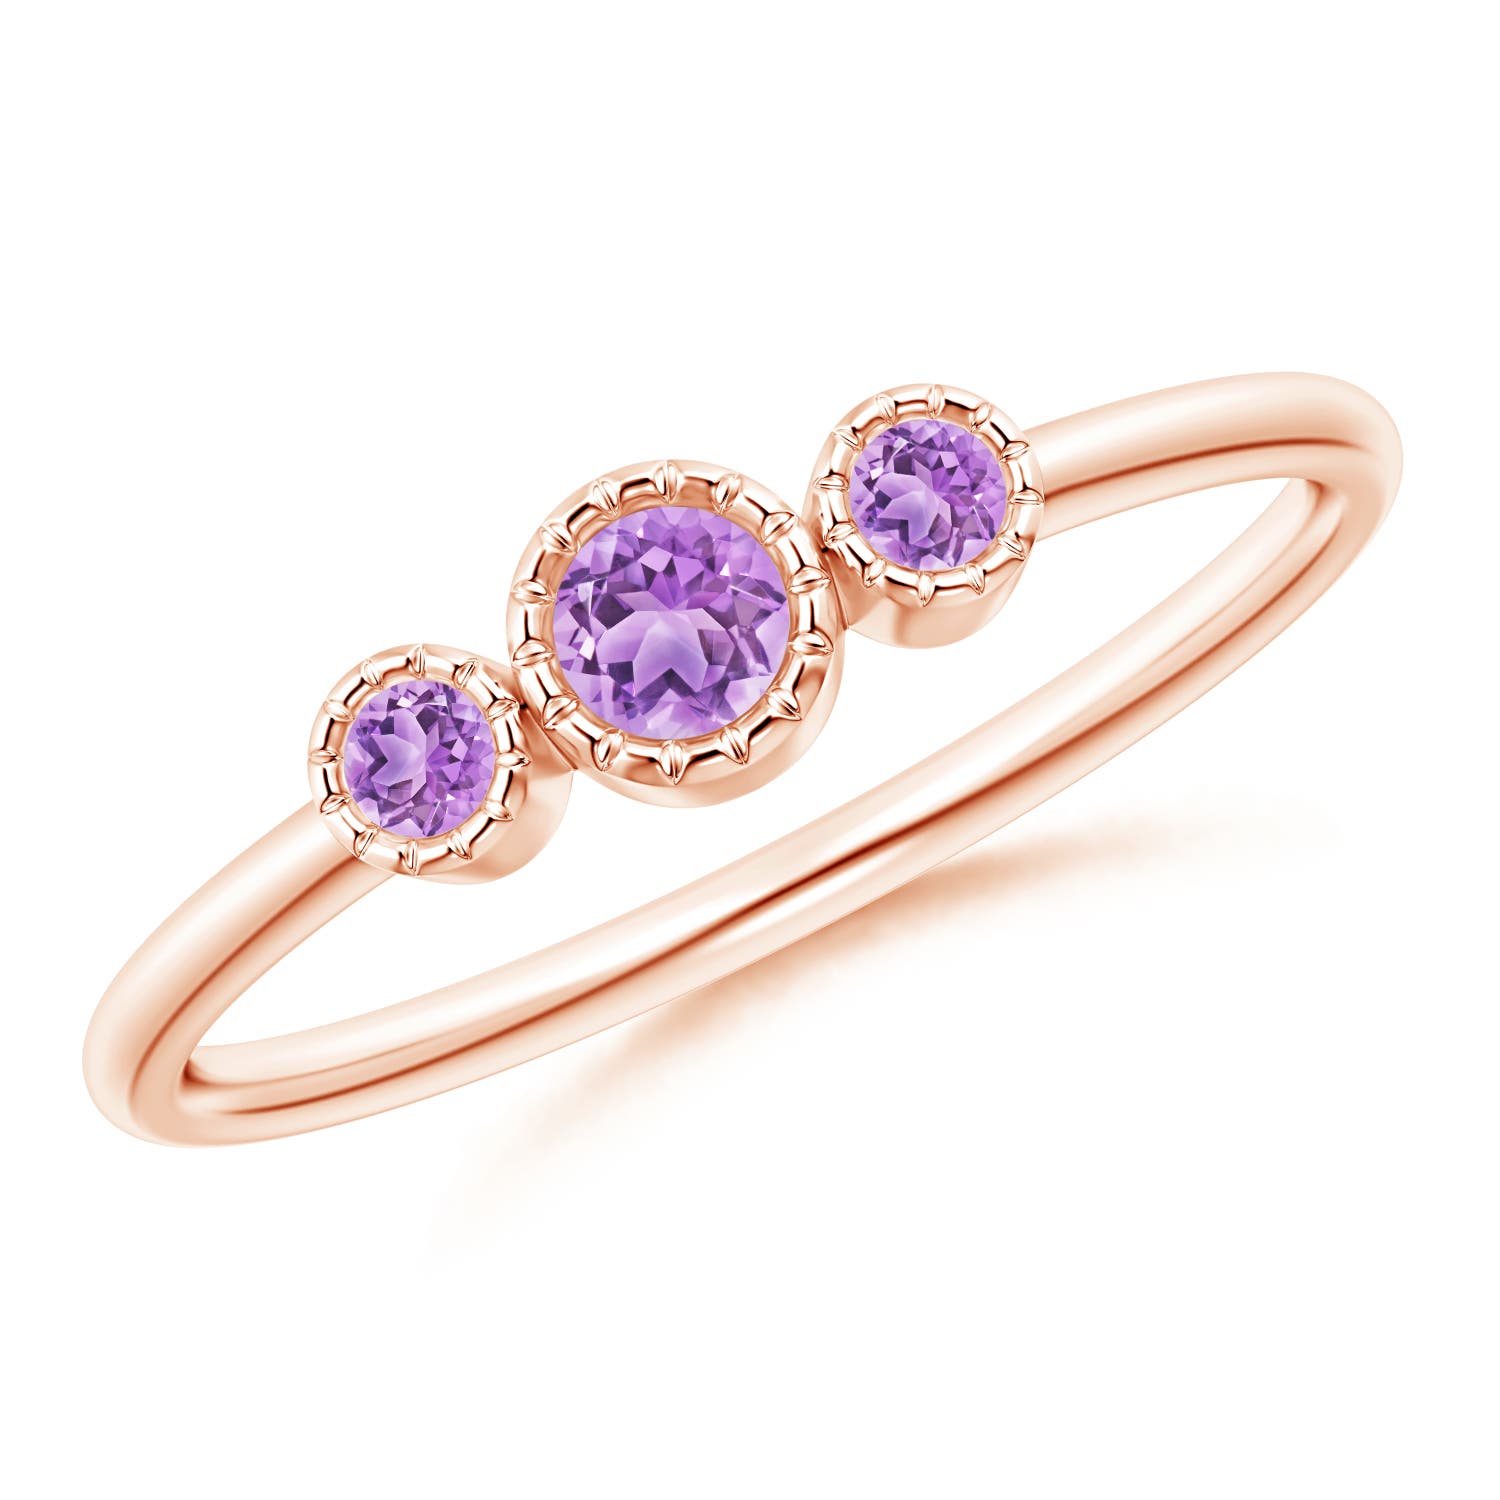 AAA - Amethyst / 0.16 CT / 14 KT Rose Gold